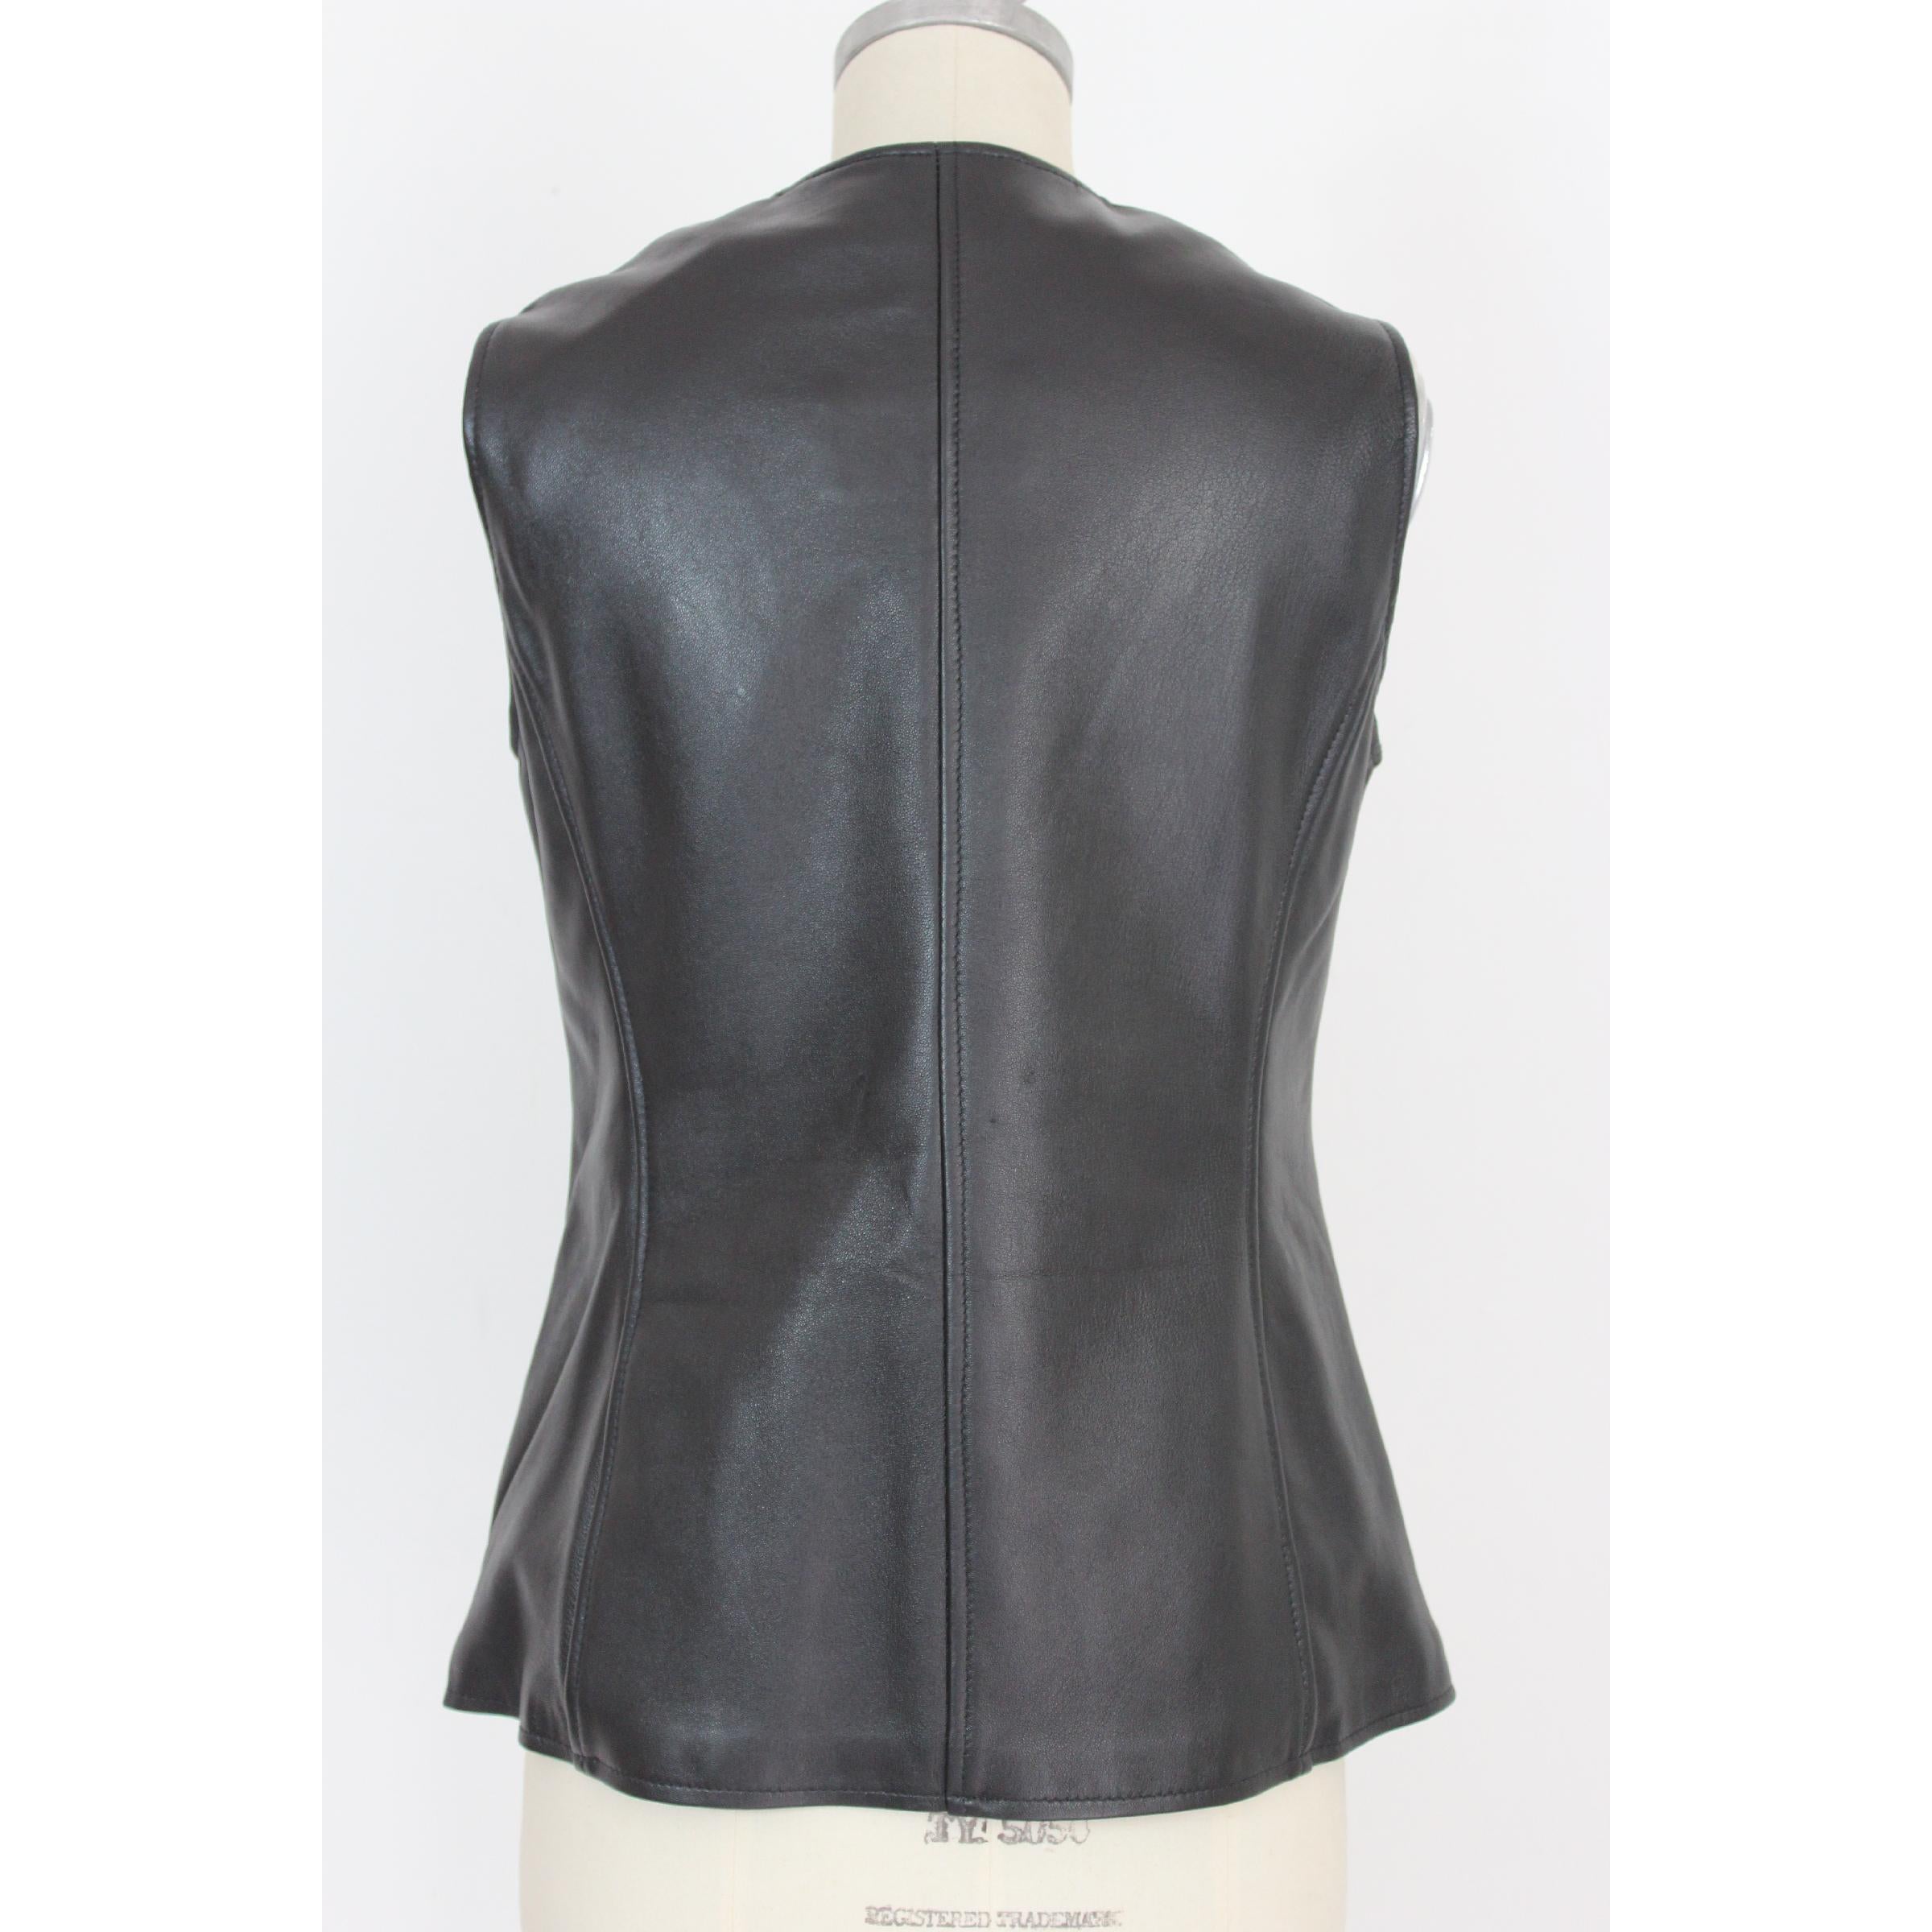 Mabrun vintage 90s women's vest. Slim fit biker model, black, 100% leather. Zip closure, lined interior. Made in Italy. New with tag.

Size: 42 It 8 Us 10 Uk

Shoulder: 42 cm
Bust/Chest: 46 cm
Length: 64 cm